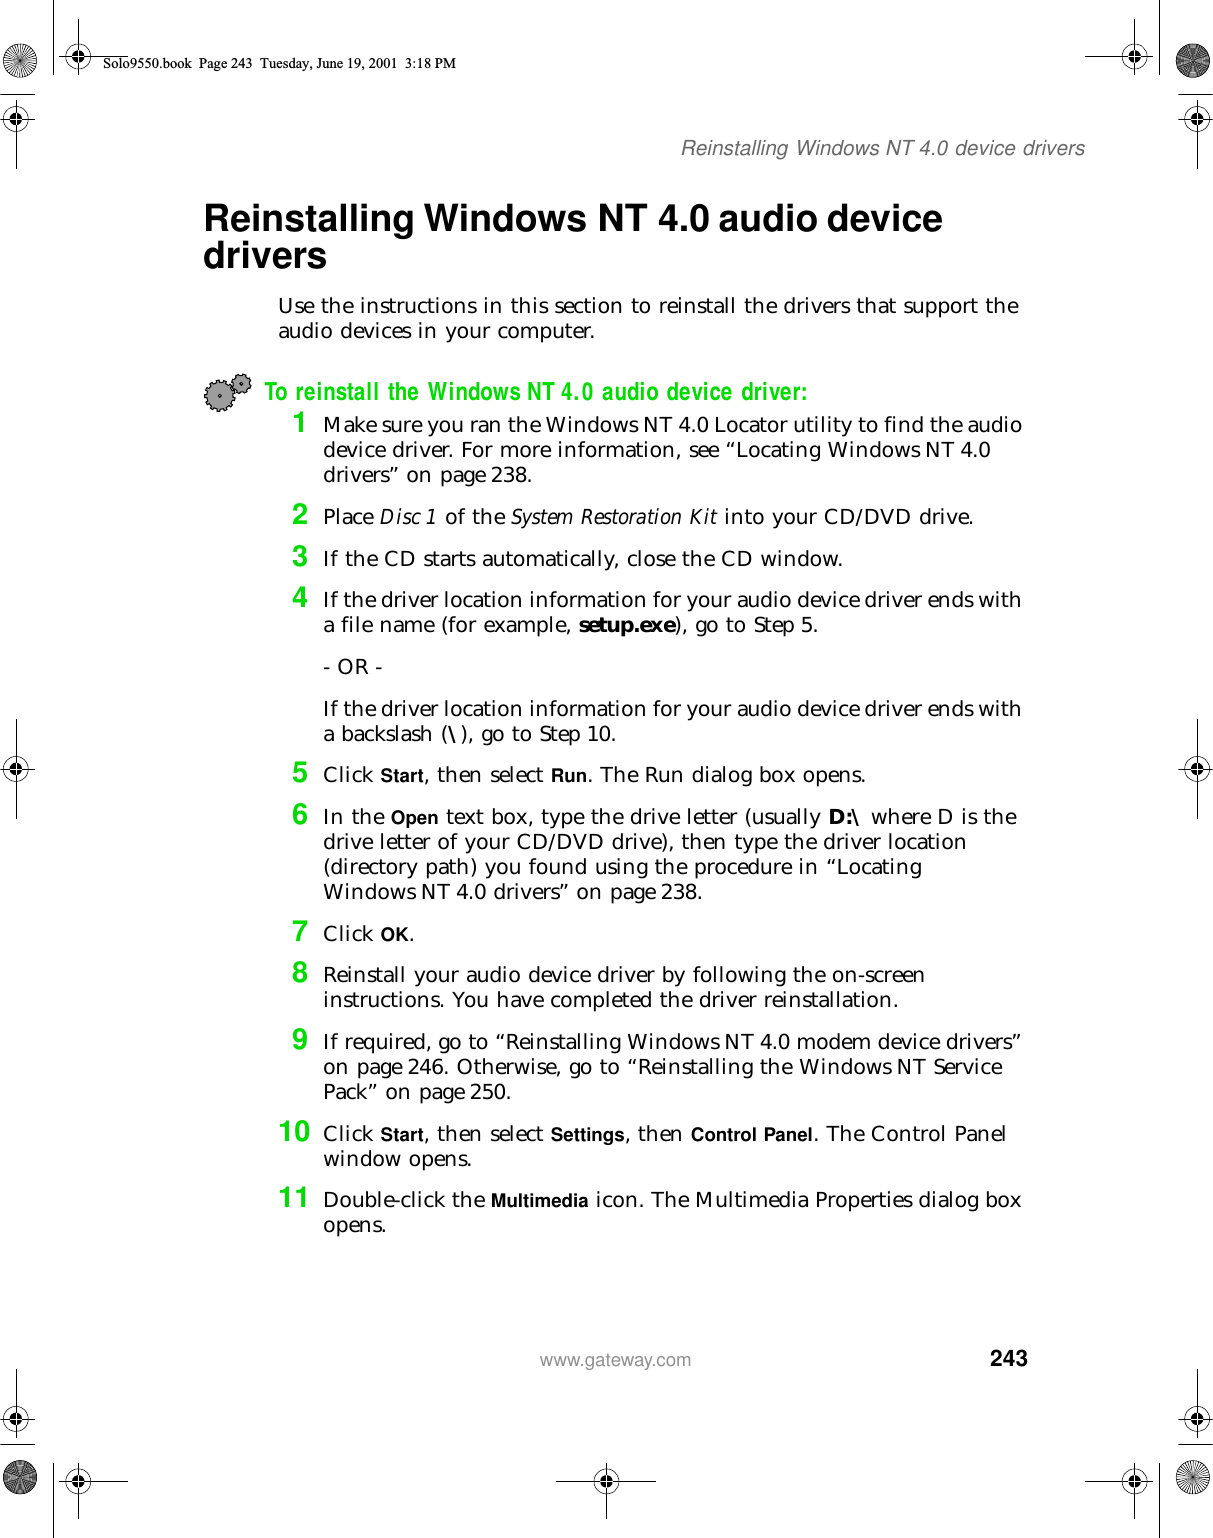 243Reinstalling Windows NT 4.0 device driverswww.gateway.comReinstalling Windows NT 4.0 audio device driversUse the instructions in this section to reinstall the drivers that support the audio devices in your computer.To reinstall the Windows NT 4.0 audio device driver:1Make sure you ran the Windows NT 4.0 Locator utility to find the audio device driver. For more information, see “Locating Windows NT 4.0 drivers” on page 238.2Place Disc 1 of the System Restoration Kit into your CD/DVD drive.3If the CD starts automatically, close the CD window.4If the driver location information for your audio device driver ends with a file name (for example, setup.exe), go to Step 5.- OR -If the driver location information for your audio device driver ends with a backslash (\), go to Step 10.5Click Start, then select Run. The Run dialog box opens.6In the Open text box, type the drive letter (usually D:\ where D is the drive letter of your CD/DVD drive), then type the driver location (directory path) you found using the procedure in “Locating Windows NT 4.0 drivers” on page 238.7Click OK.8Reinstall your audio device driver by following the on-screen instructions. You have completed the driver reinstallation.9If required, go to “Reinstalling Windows NT 4.0 modem device drivers” on page 246. Otherwise, go to “Reinstalling the Windows NT Service Pack” on page 250.10 Click Start, then select Settings, then Control Panel. The Control Panel window opens.11 Double-click the Multimedia icon. The Multimedia Properties dialog box opens.Solo9550.book Page 243 Tuesday, June 19, 2001 3:18 PM